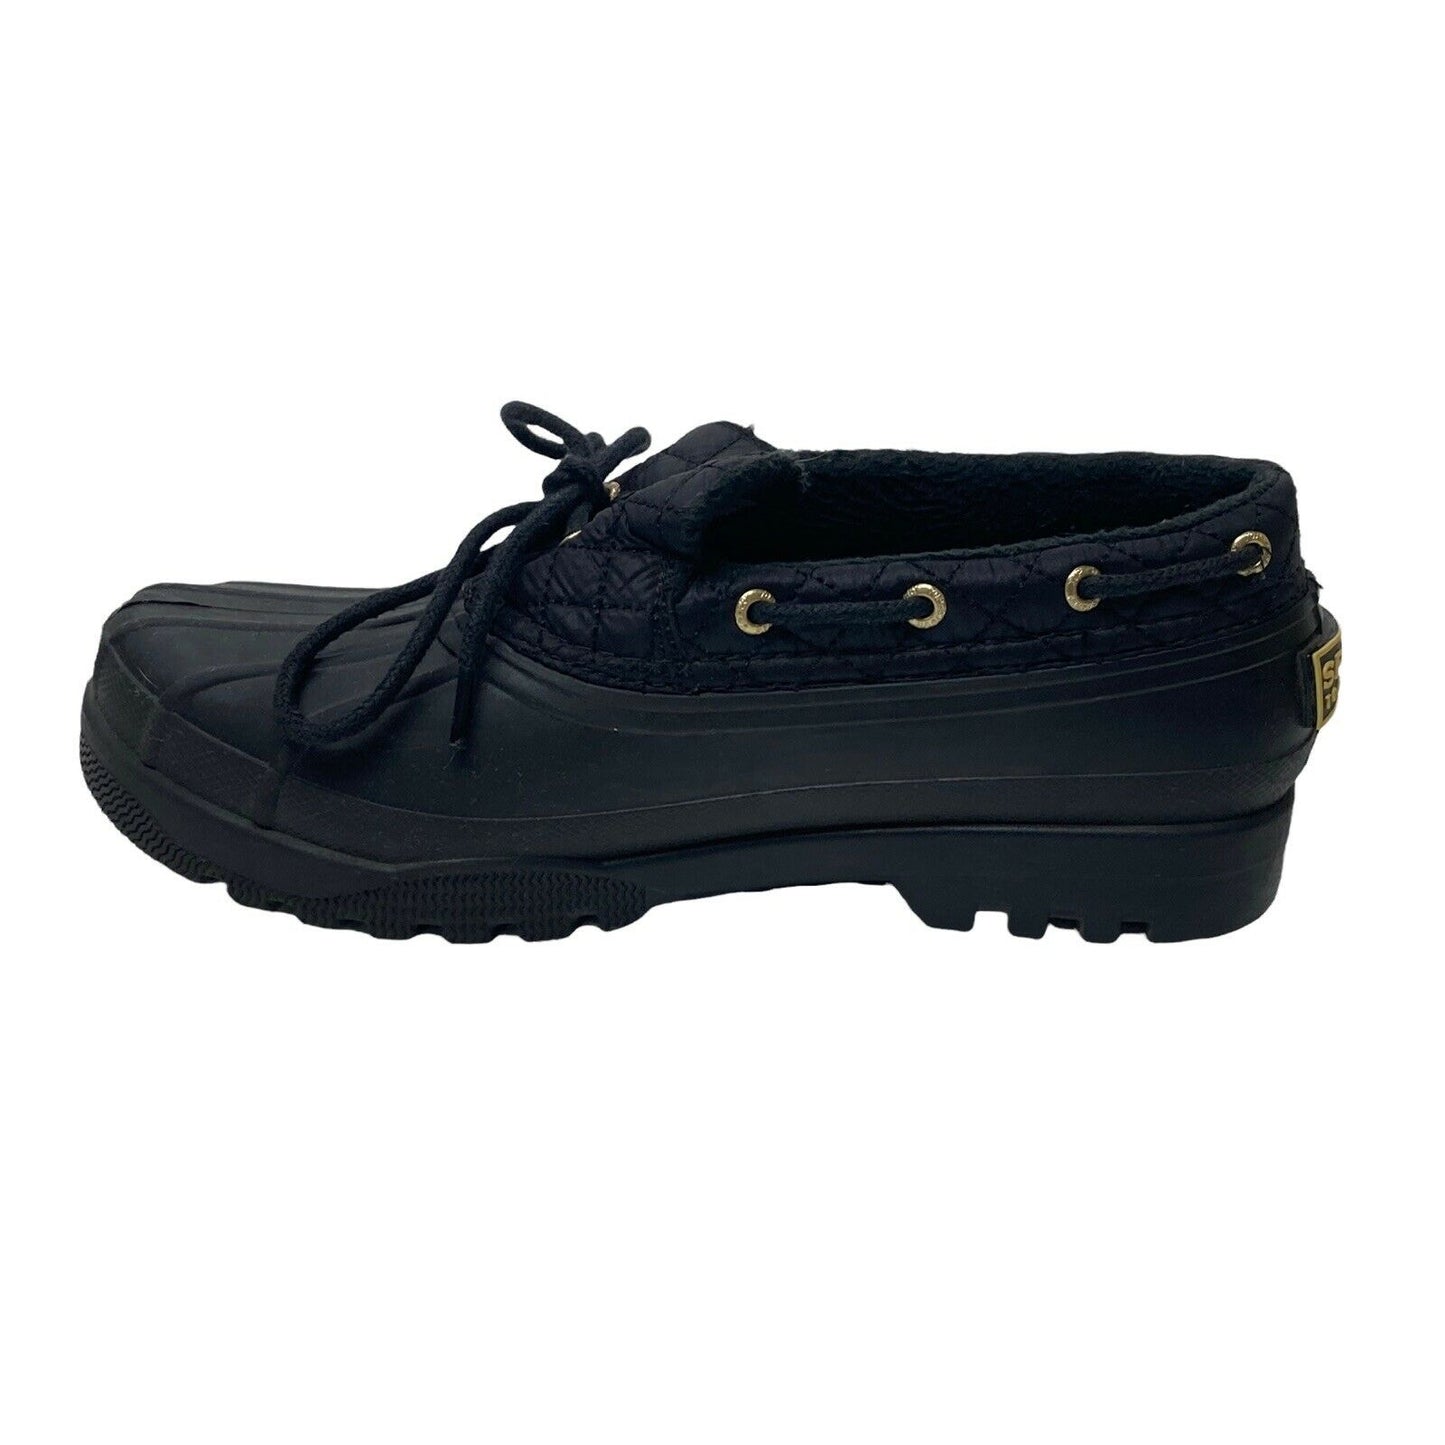 Sperry Top-sider Duckling STS95272 Black Lined Rubber Duck Shoe Women's Size 7